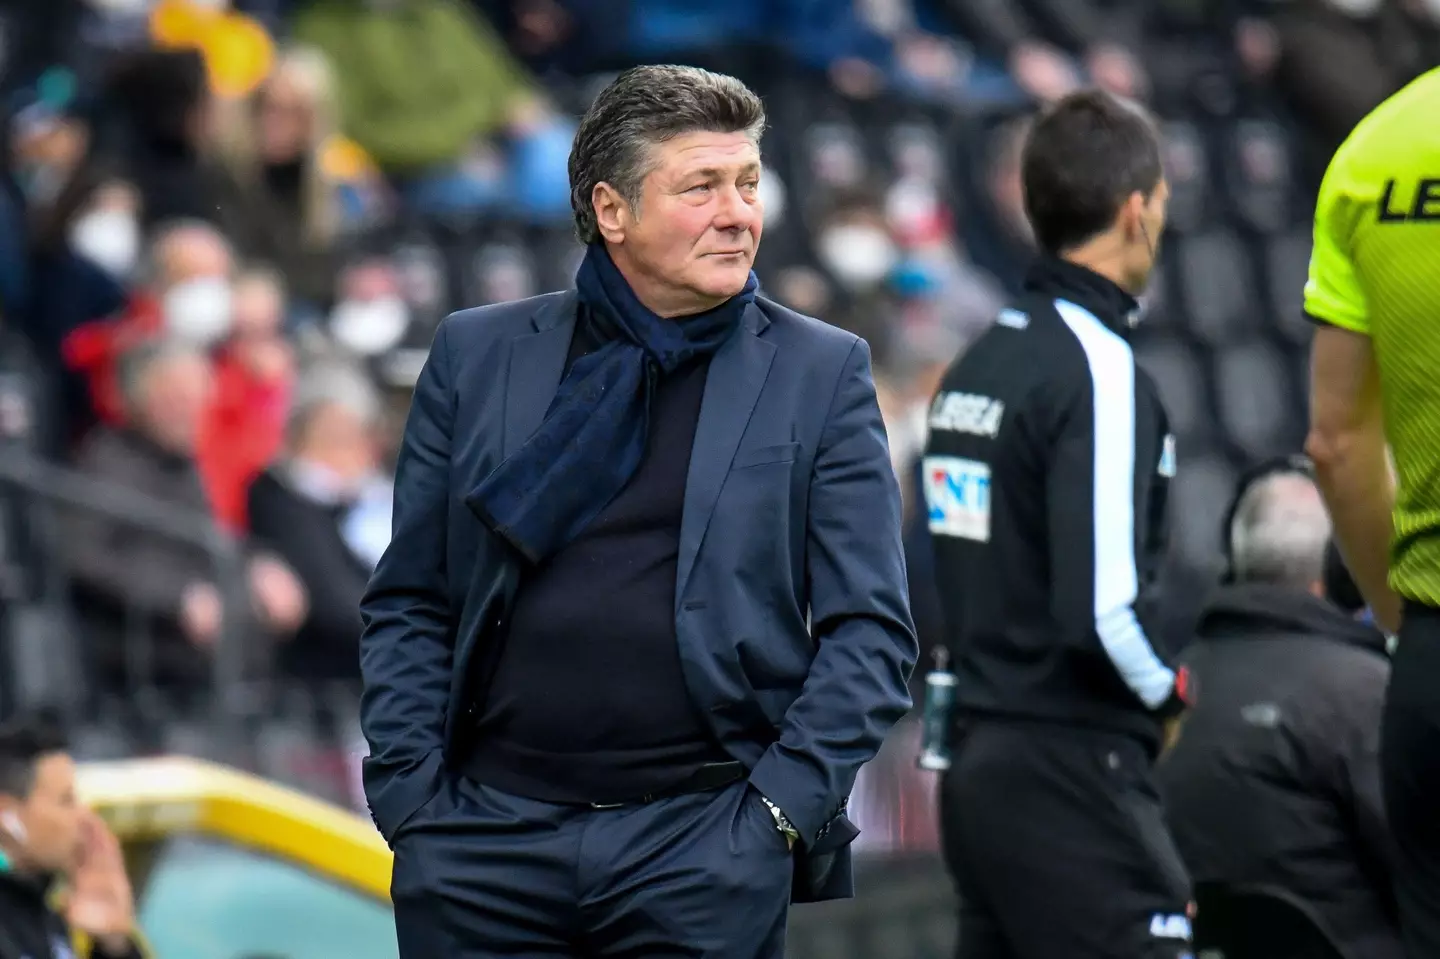 Mazzarri has been sacked with Cagliari two points outside the drop zone in Italy (Image: PA)